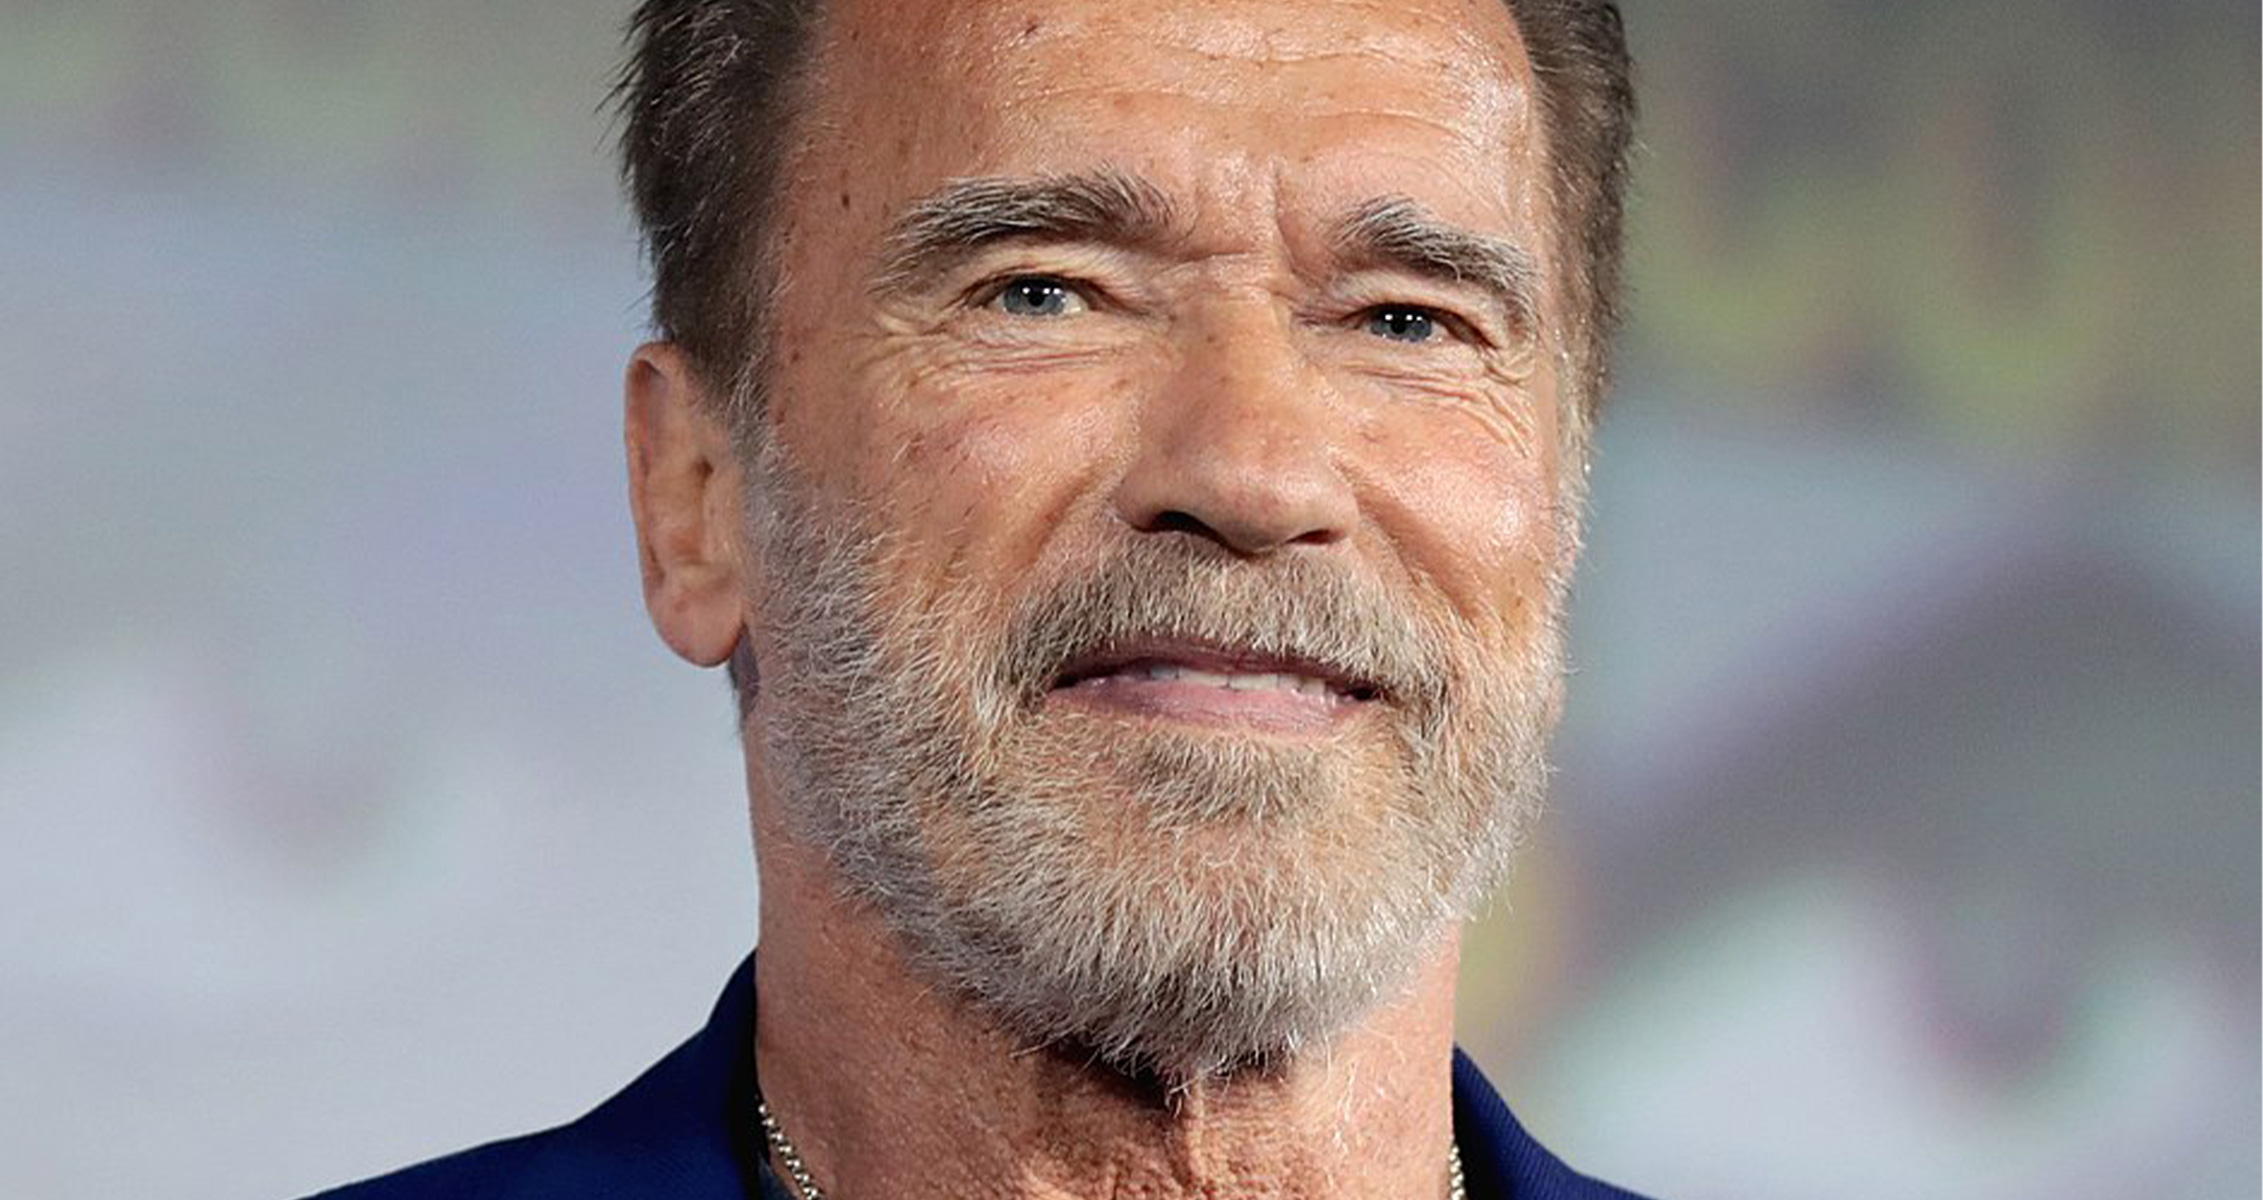 Arnold Schwarzenegger Responds After ‘Screw Your Freedom’ Comments